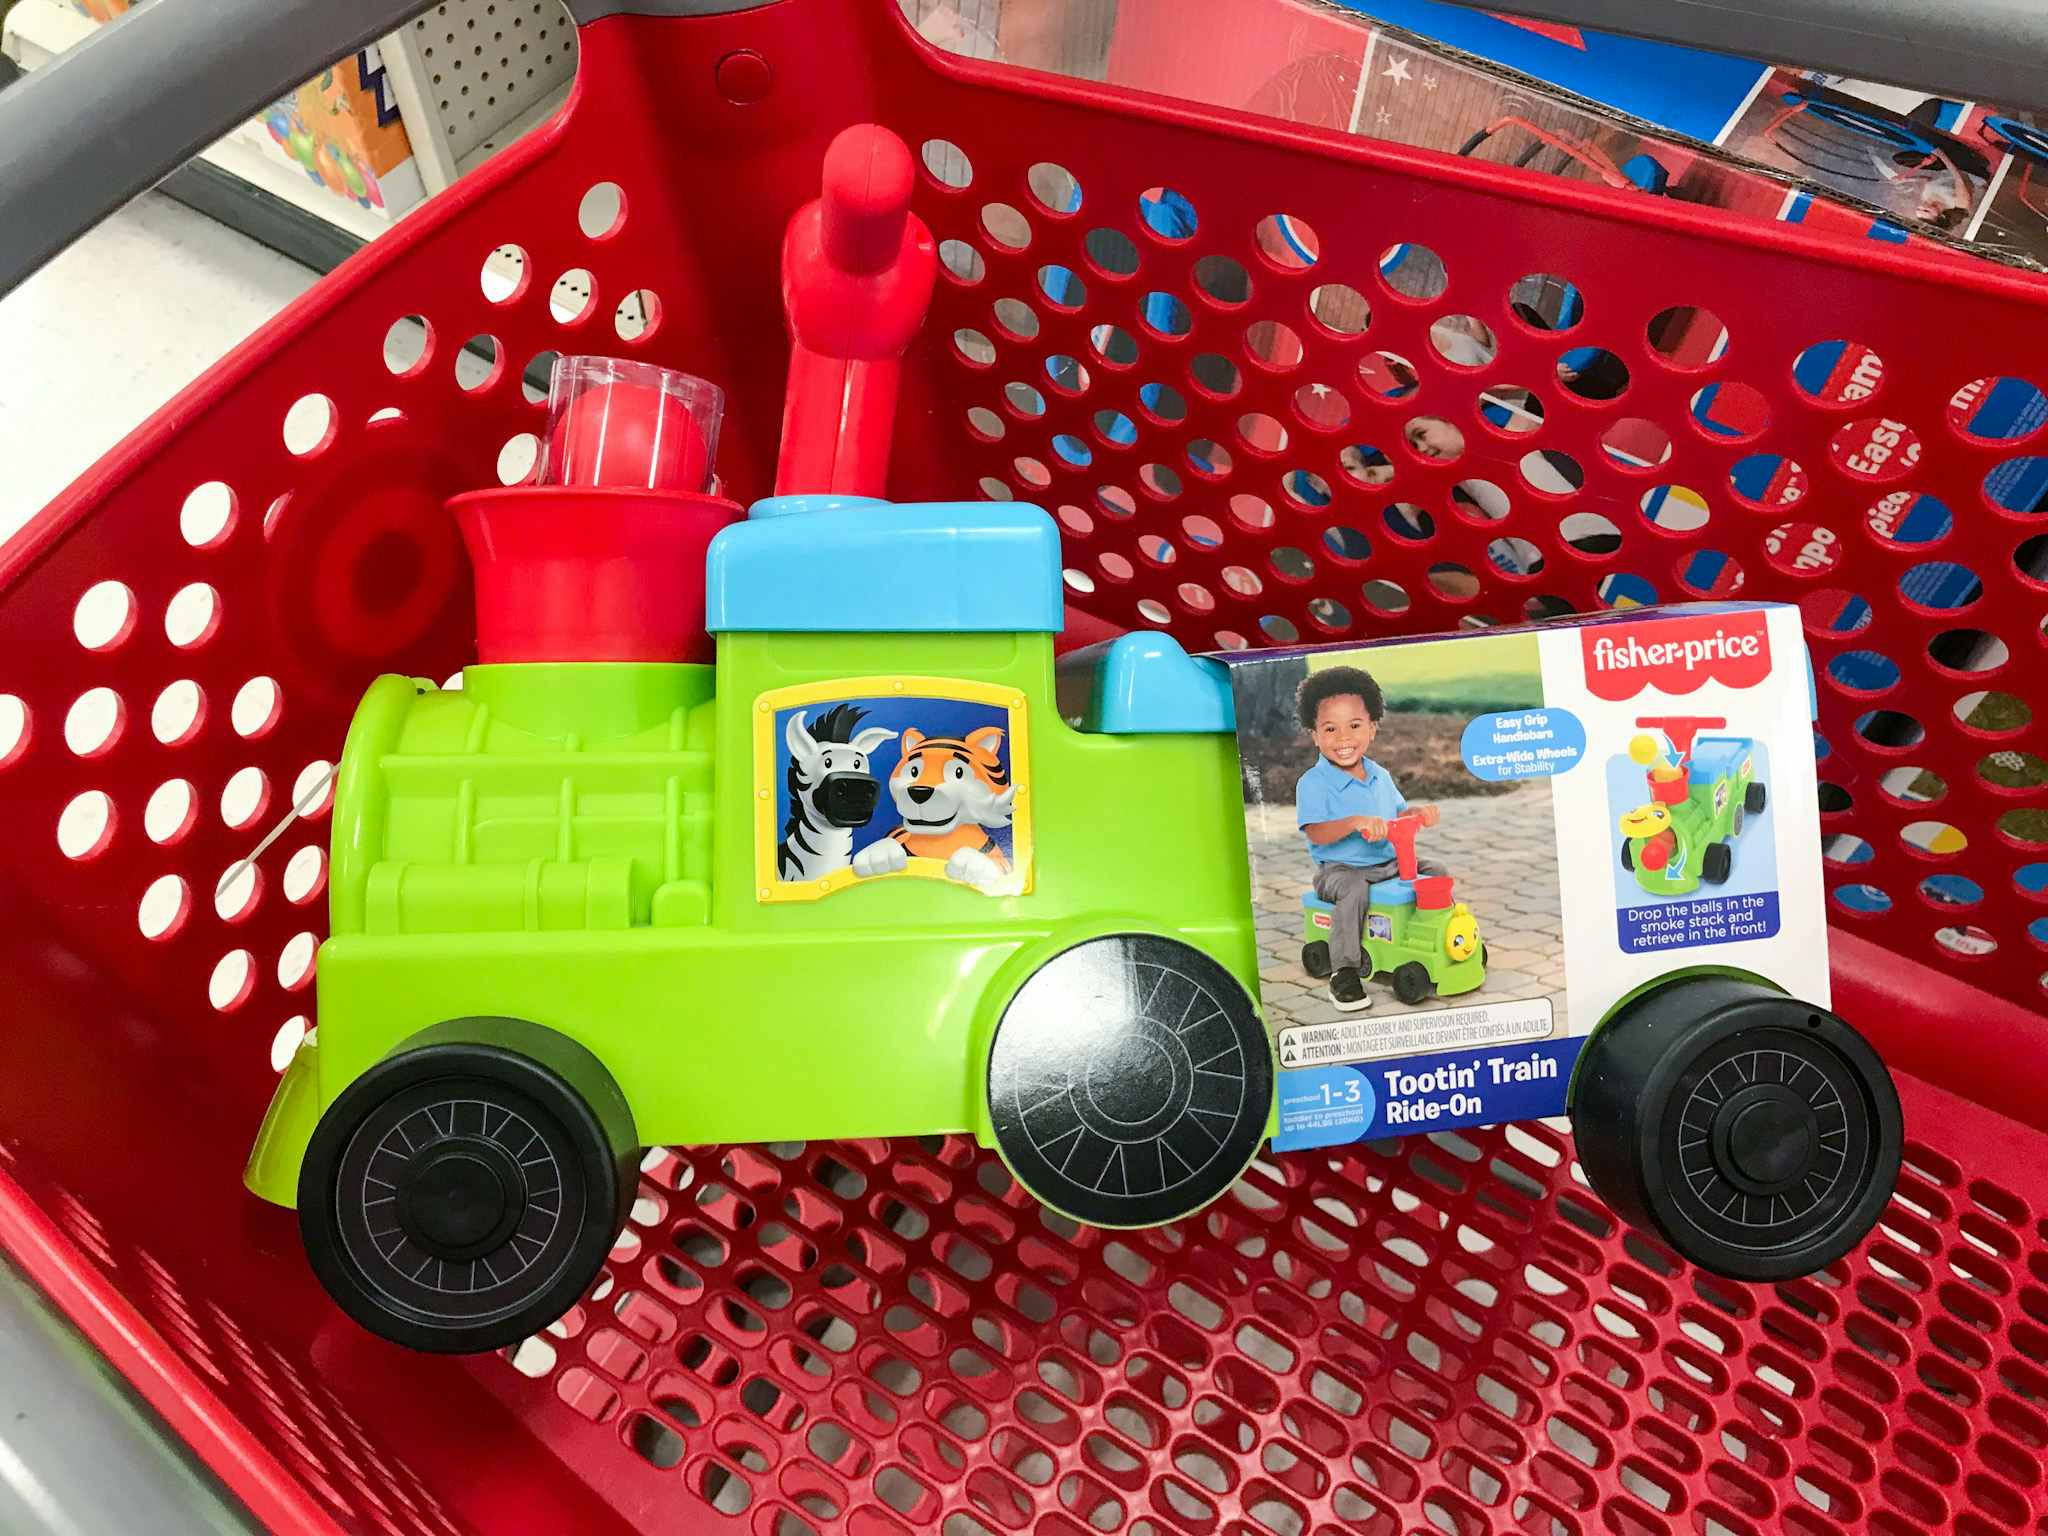 fisher-price train ride-on in a target cart